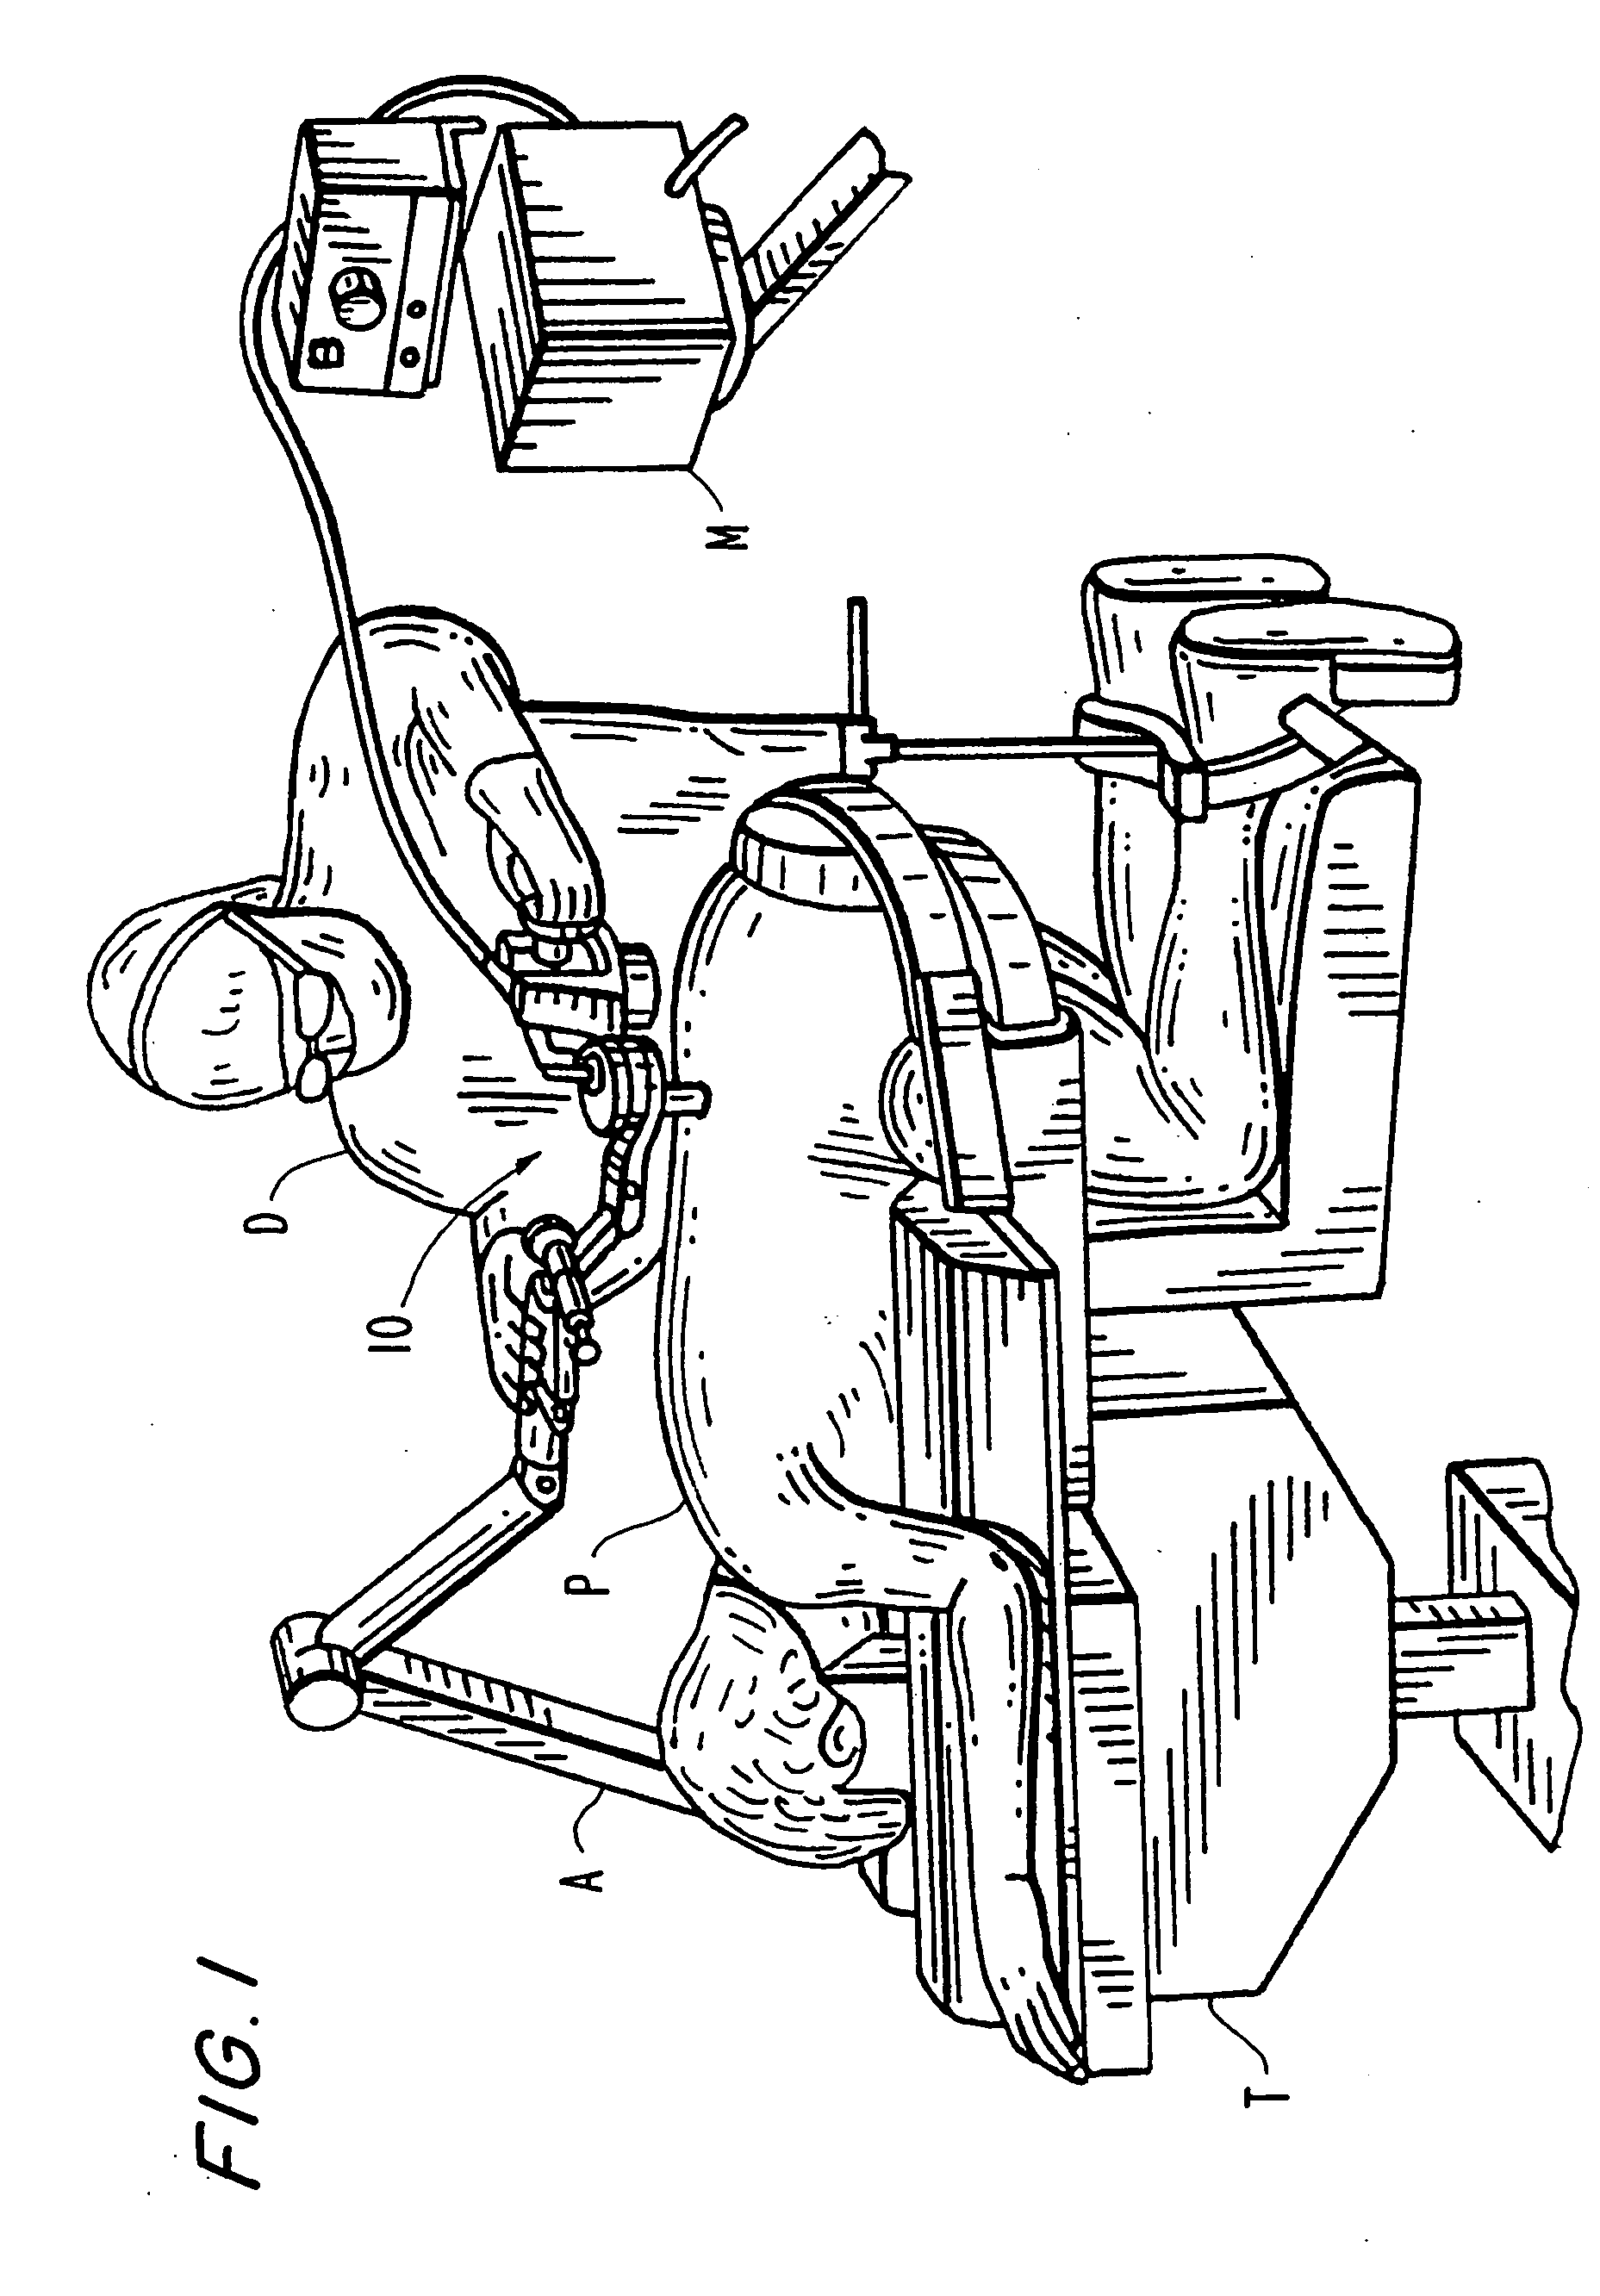 Methods and apparatus for stabilizing the spine through an access device